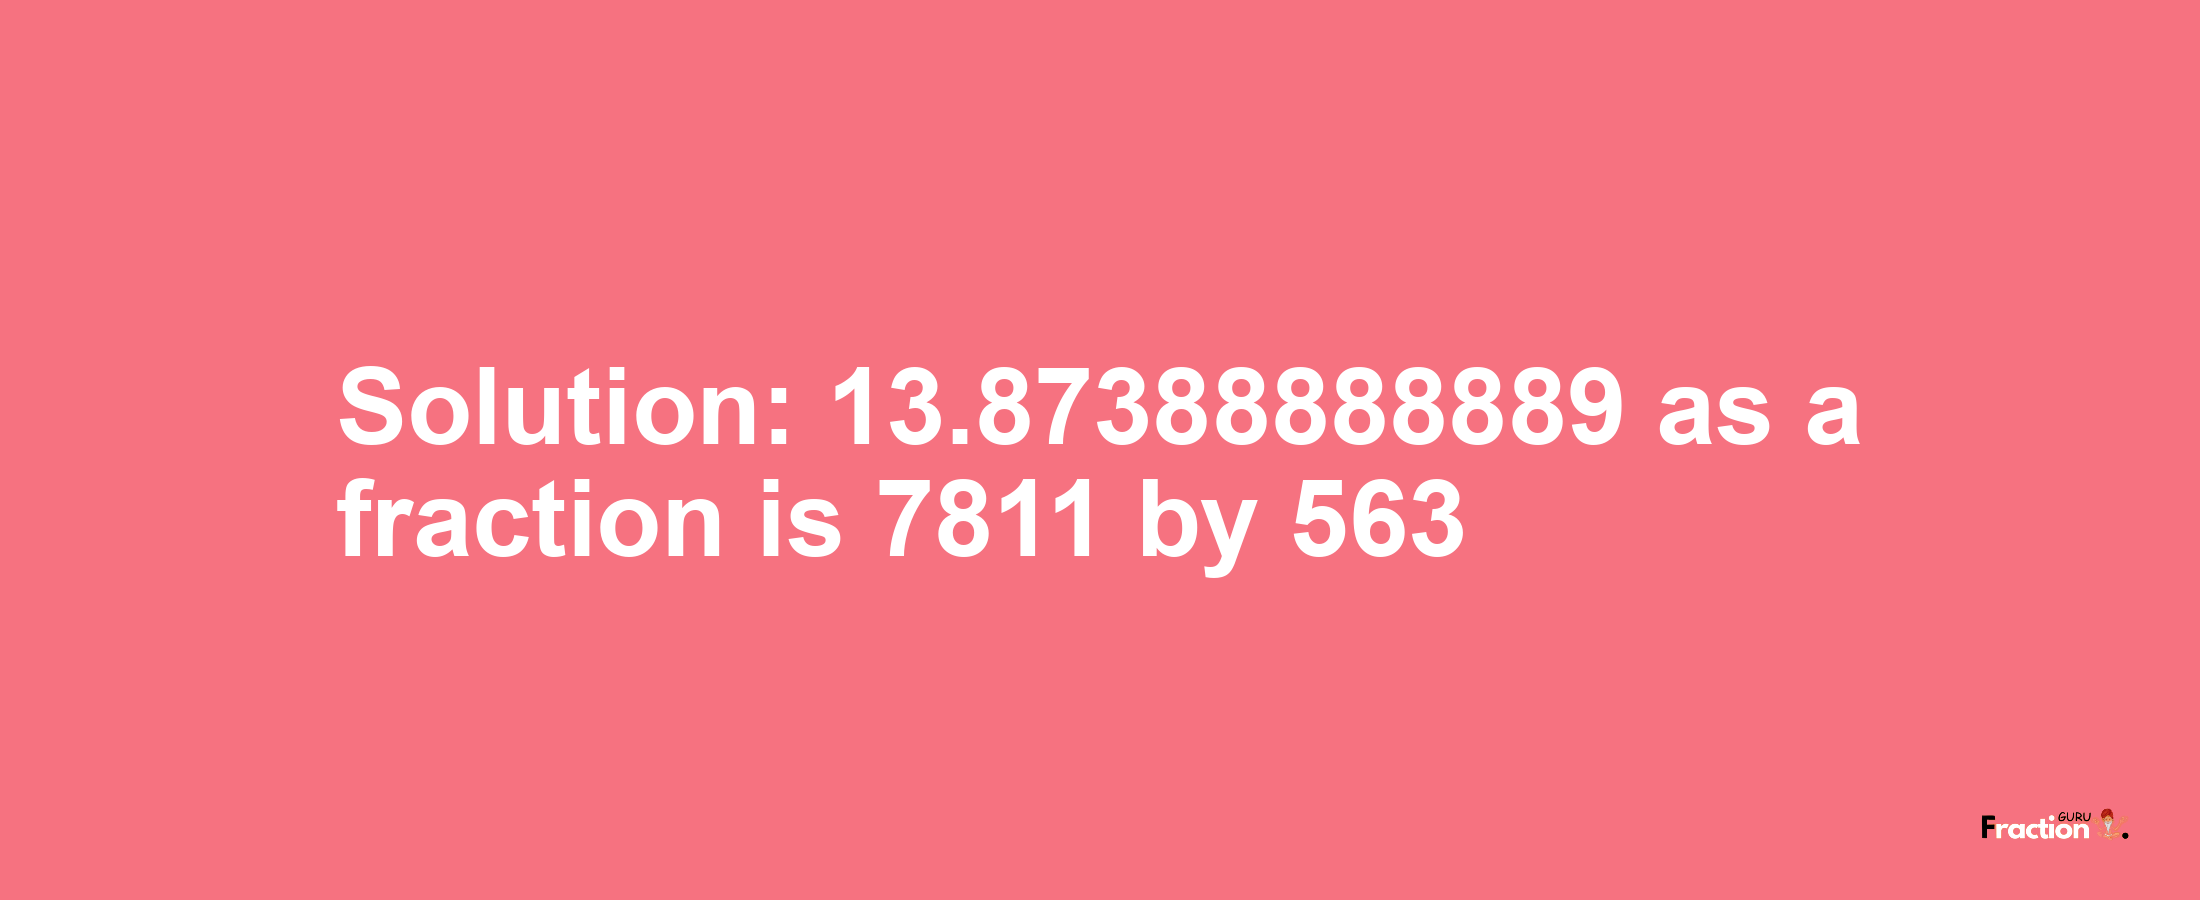 Solution:13.87388888889 as a fraction is 7811/563